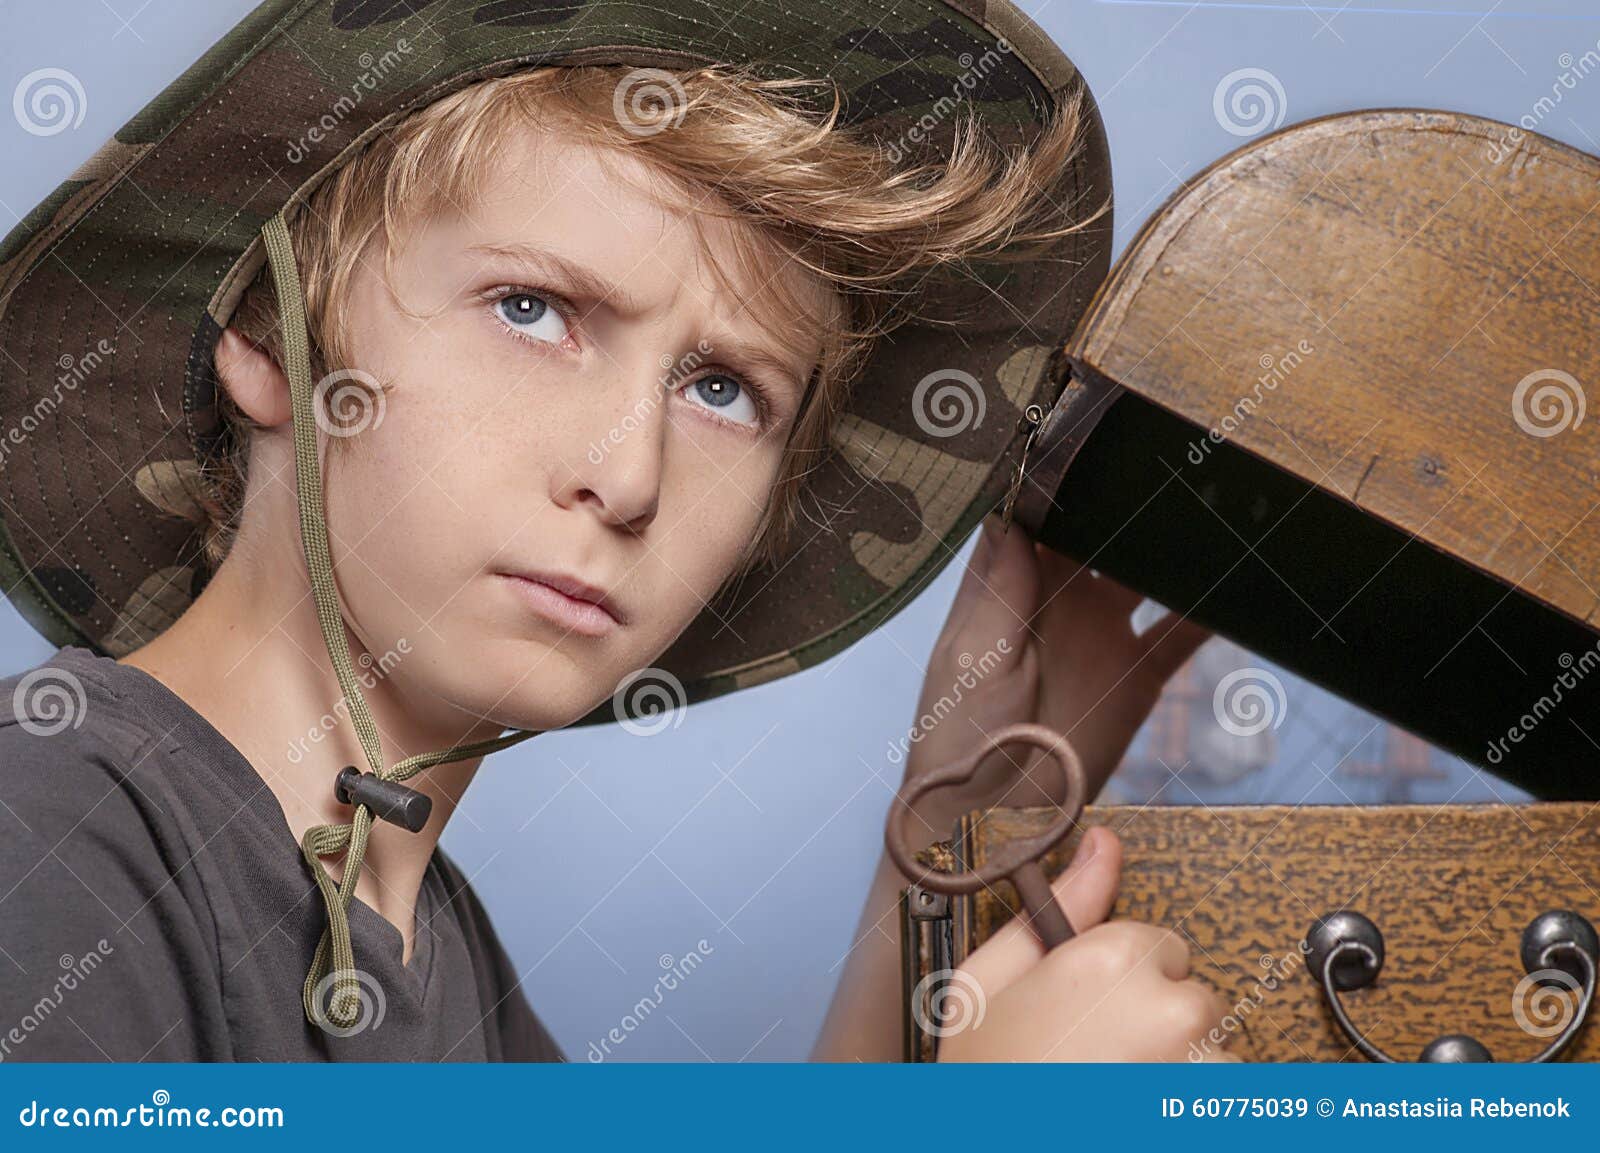 Young boy and a <b>treasure chest</b> Royalty Free Stock Images - young-boy-treasure-chest-traveler-hat-opening-holding-key-looking-thoughtfully-60775039